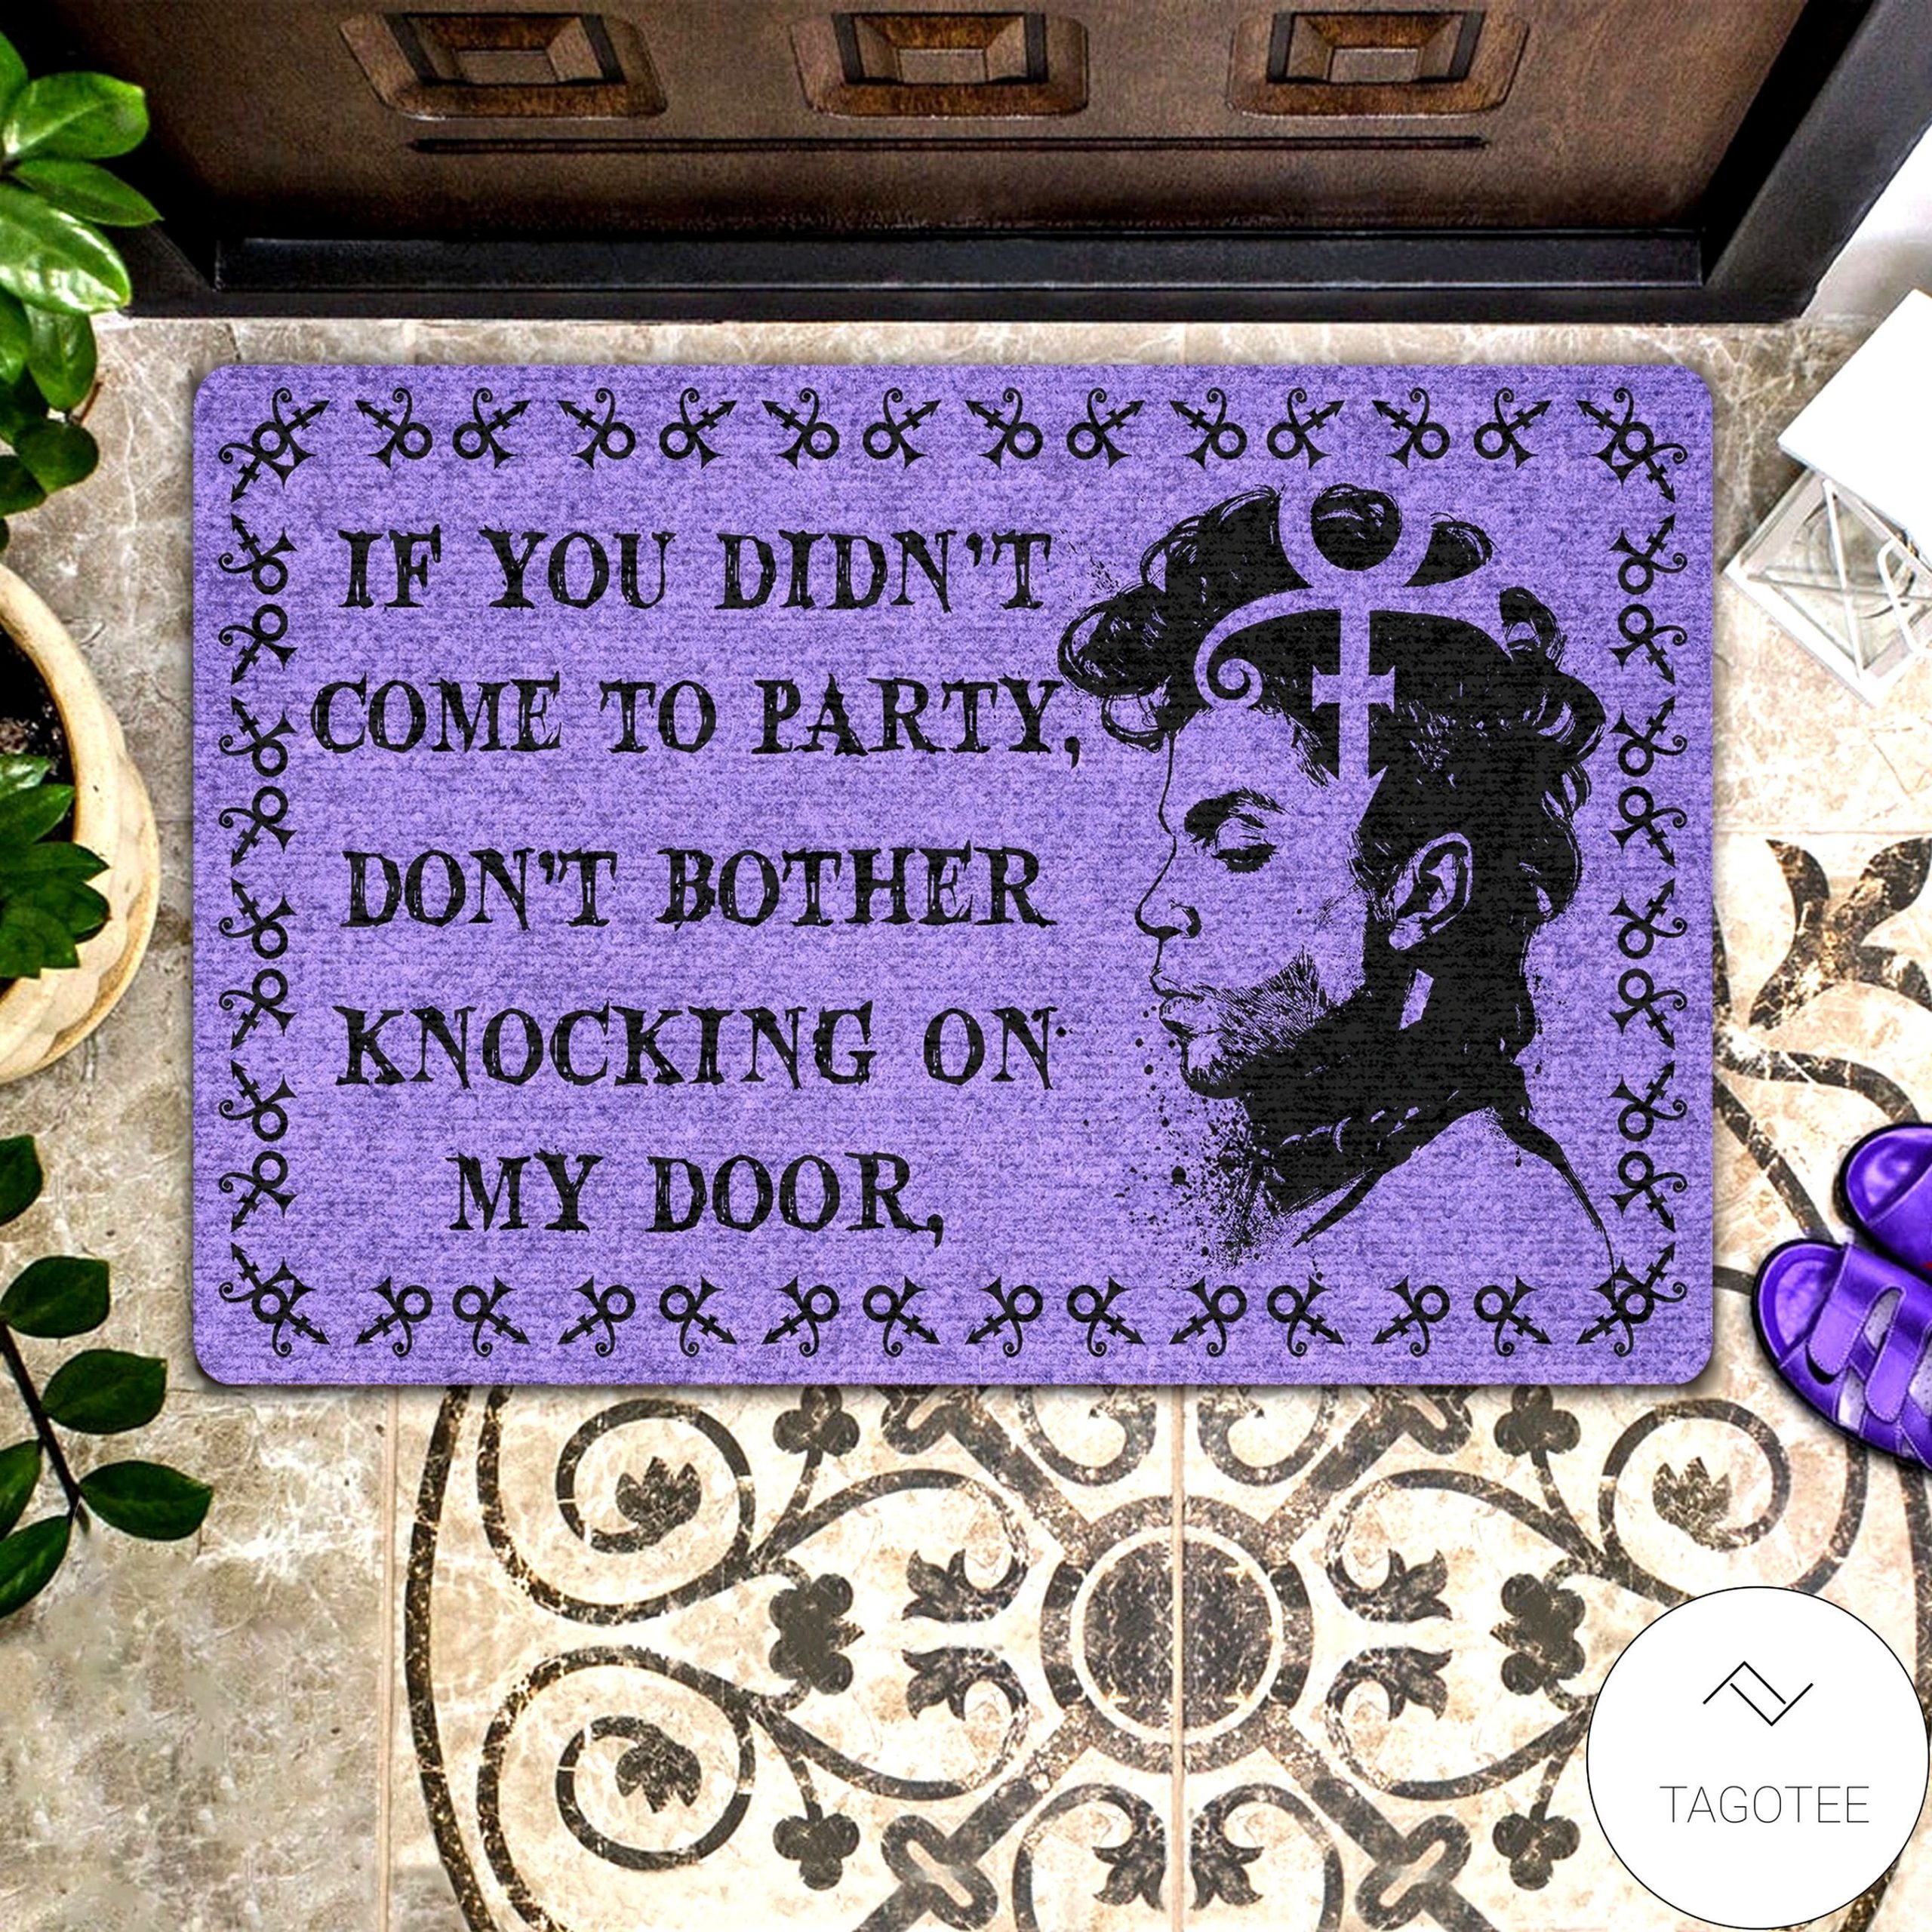 Prince If you didn’t come to party don’t bother knocking on my door doormat